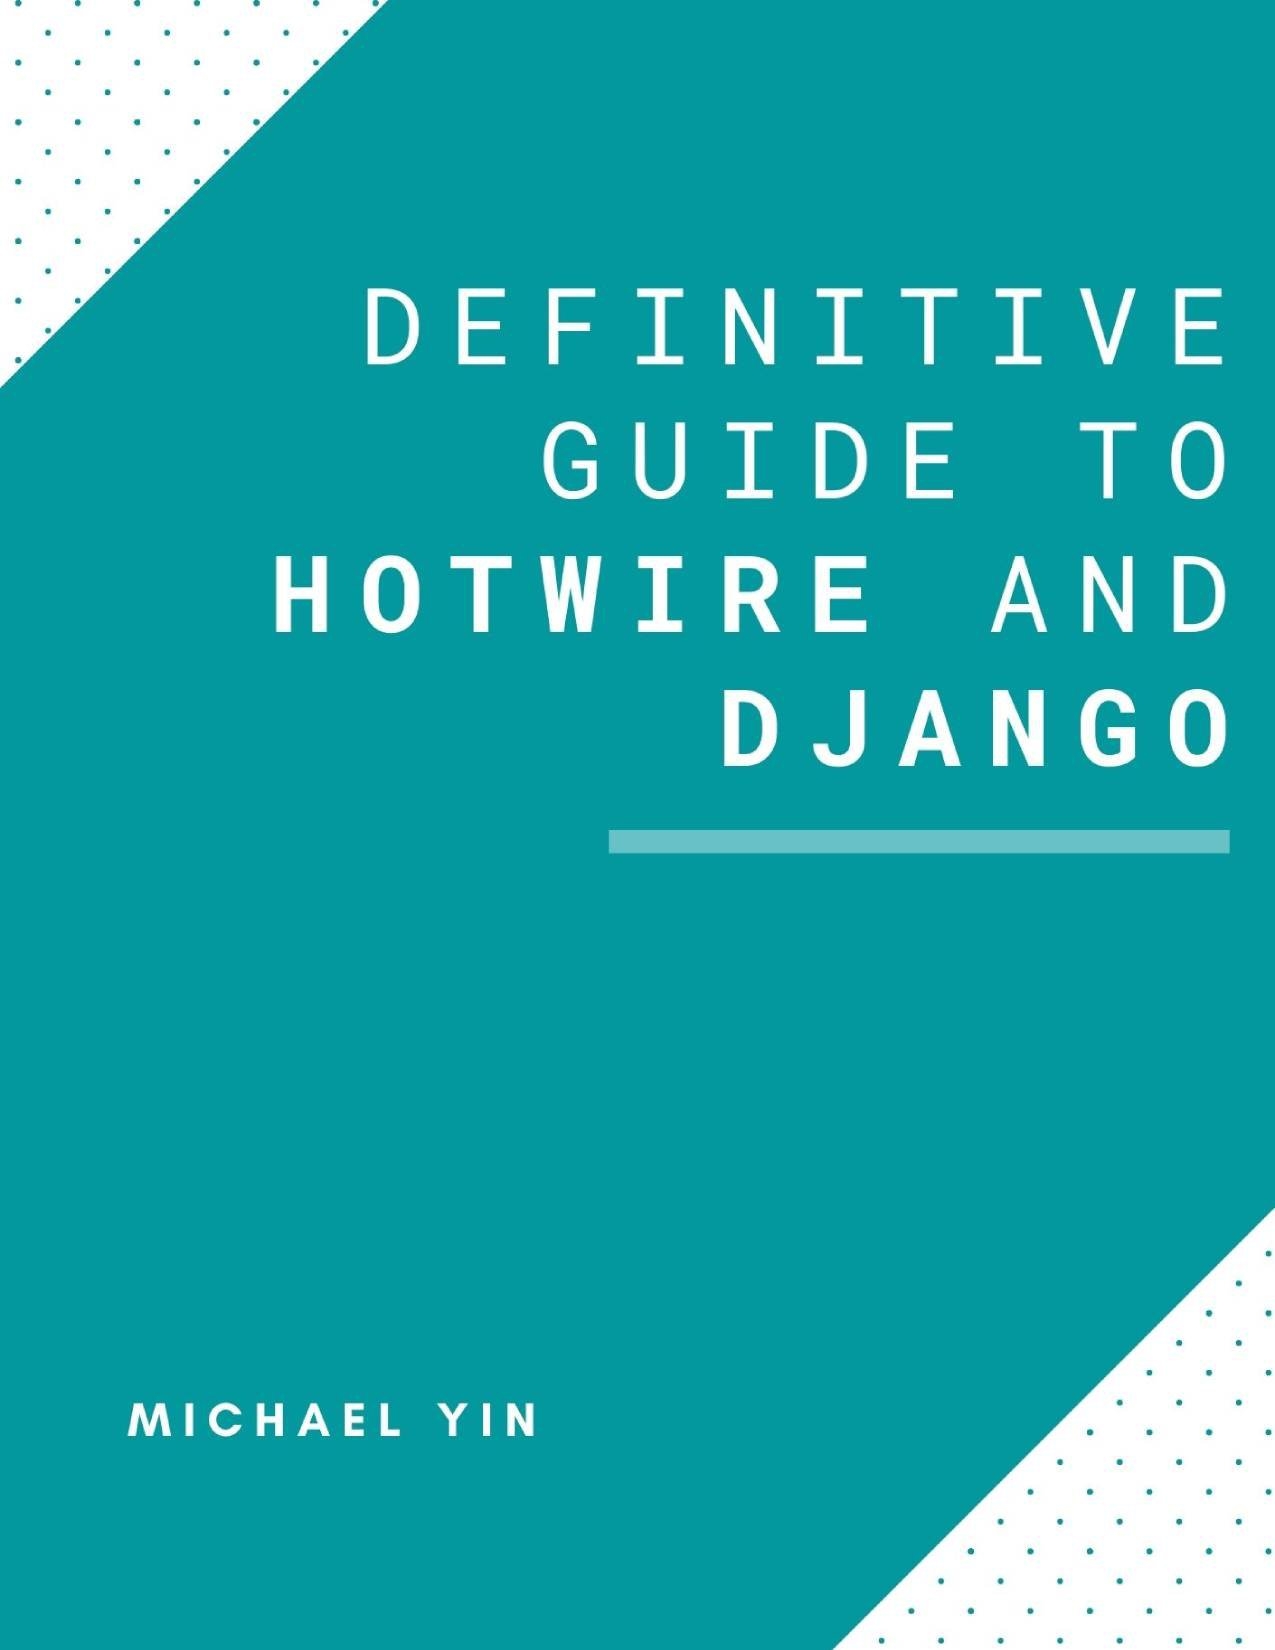 The Definitive Guide to Hotwire and Django